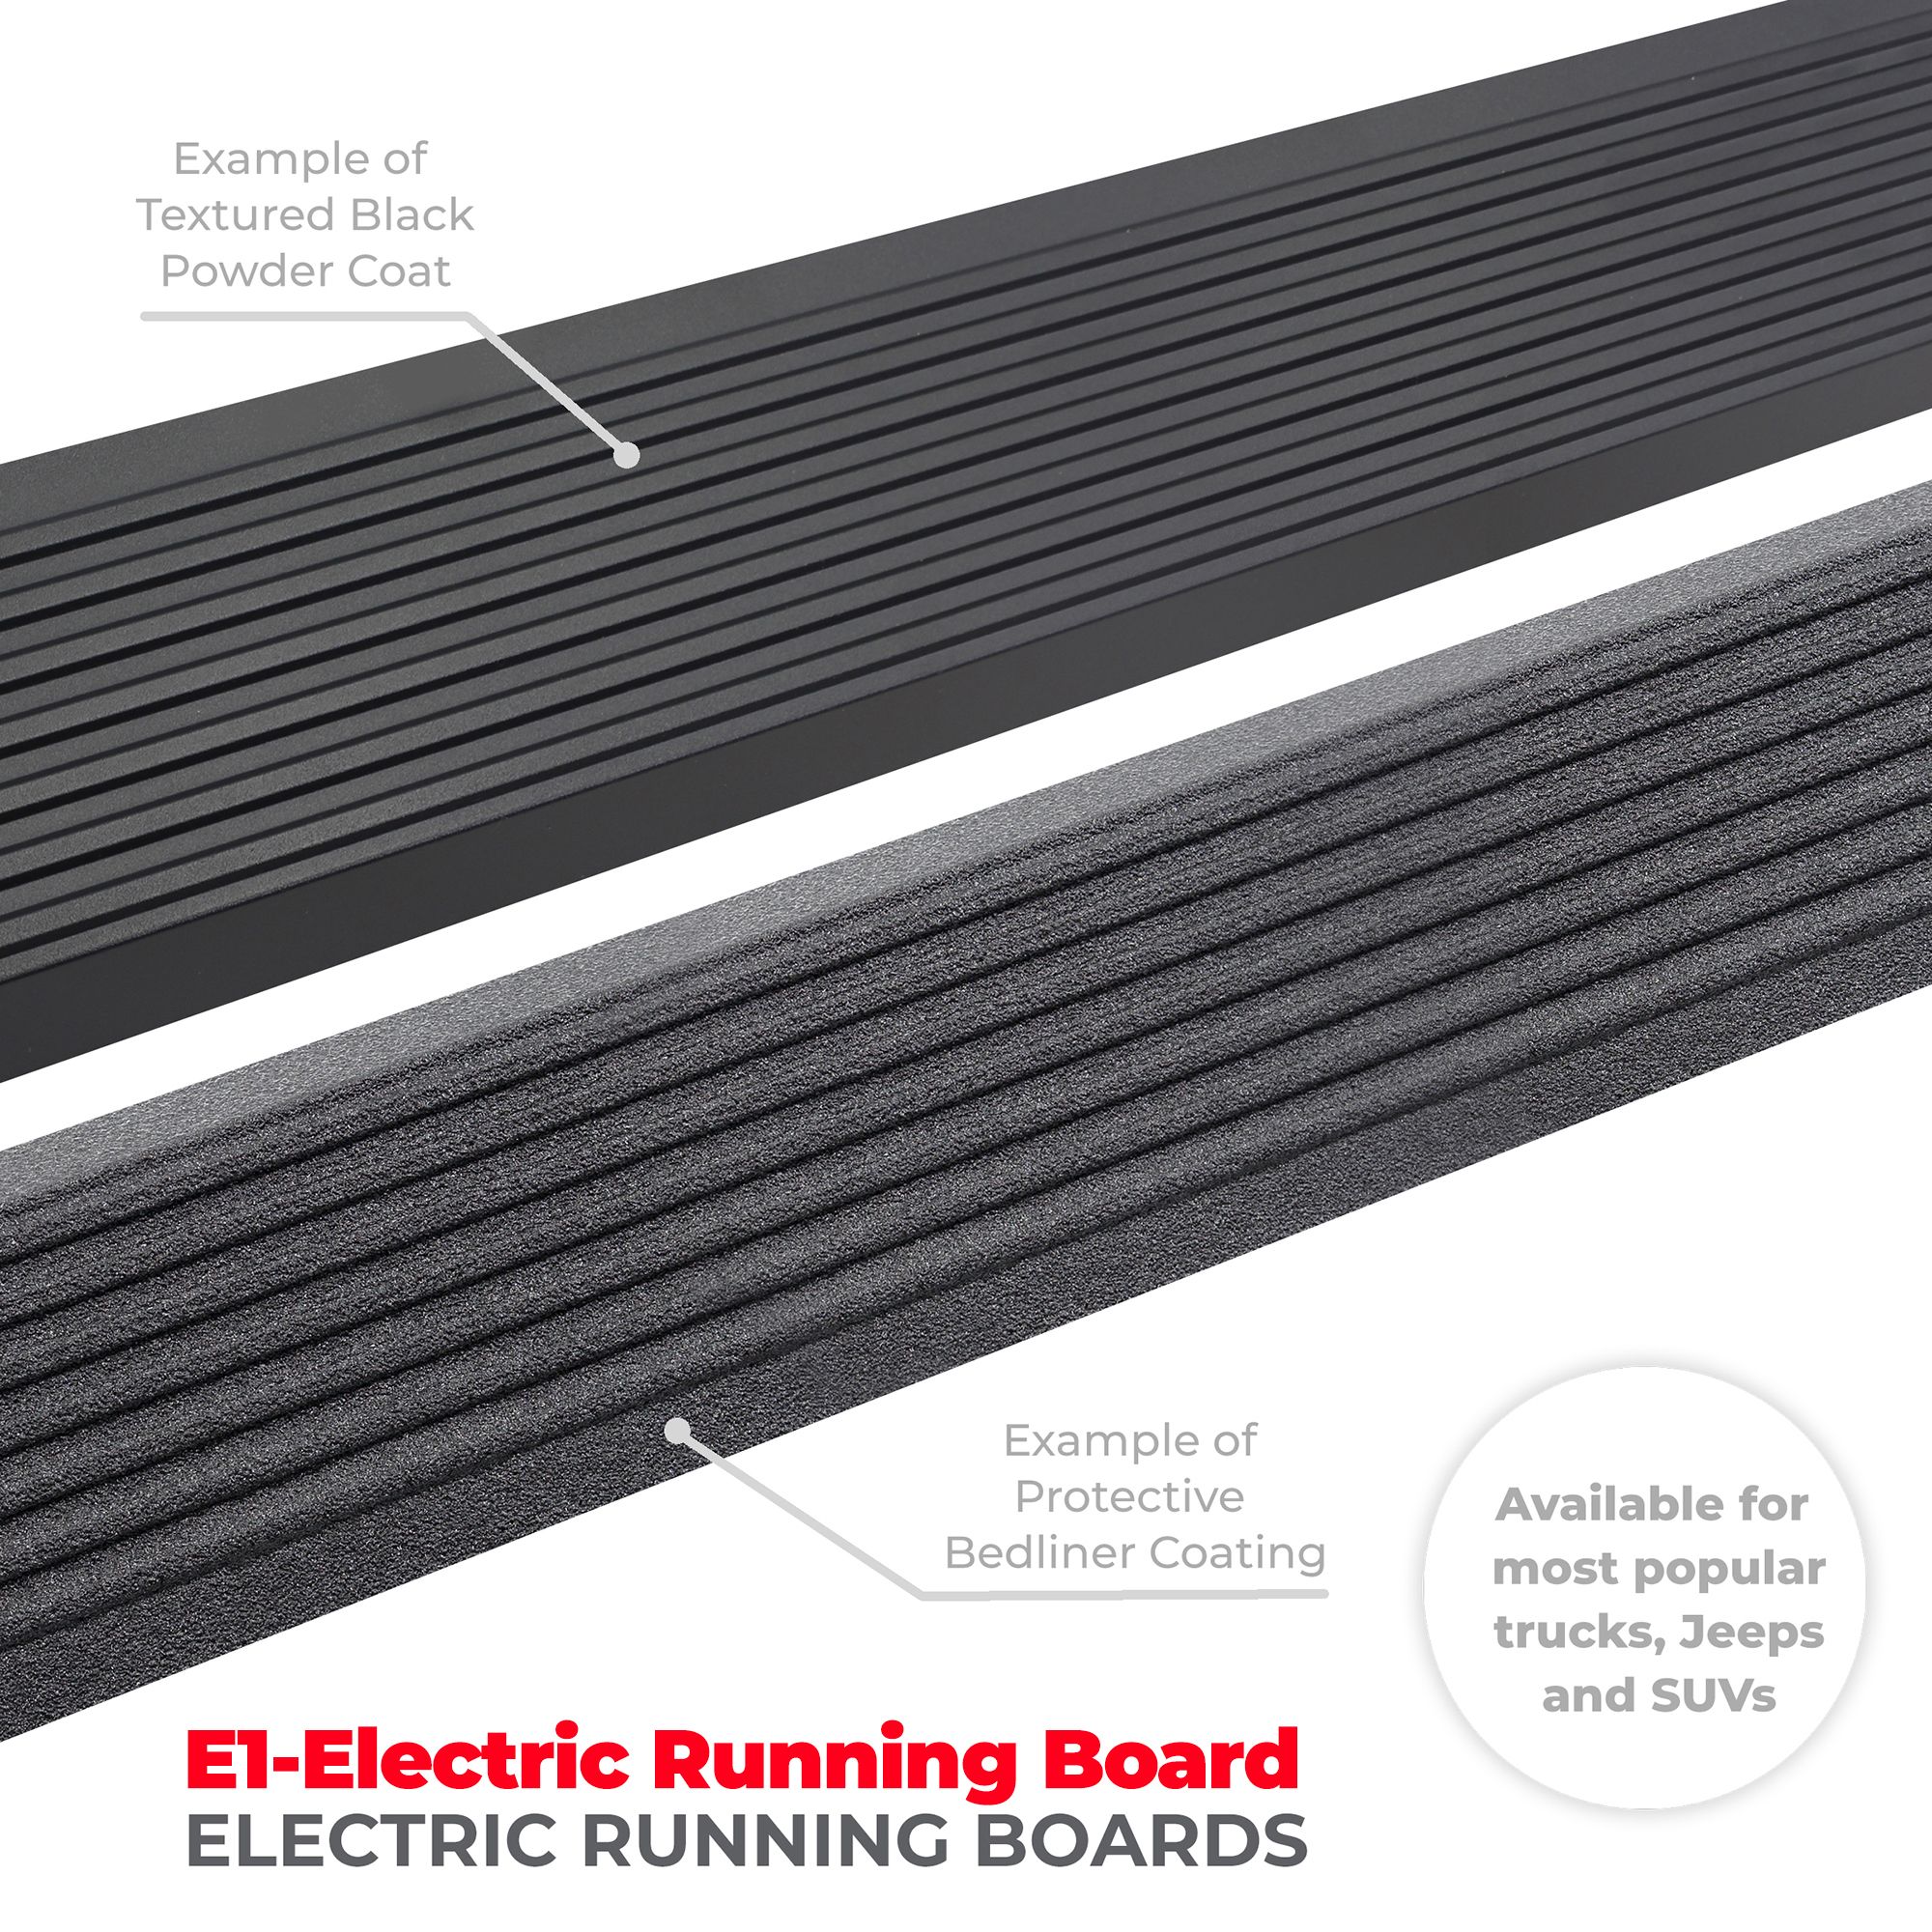 Go Rhino 20412974T - E1 Electric Running Boards With Mounting Brackets - Protective Bedliner Coating